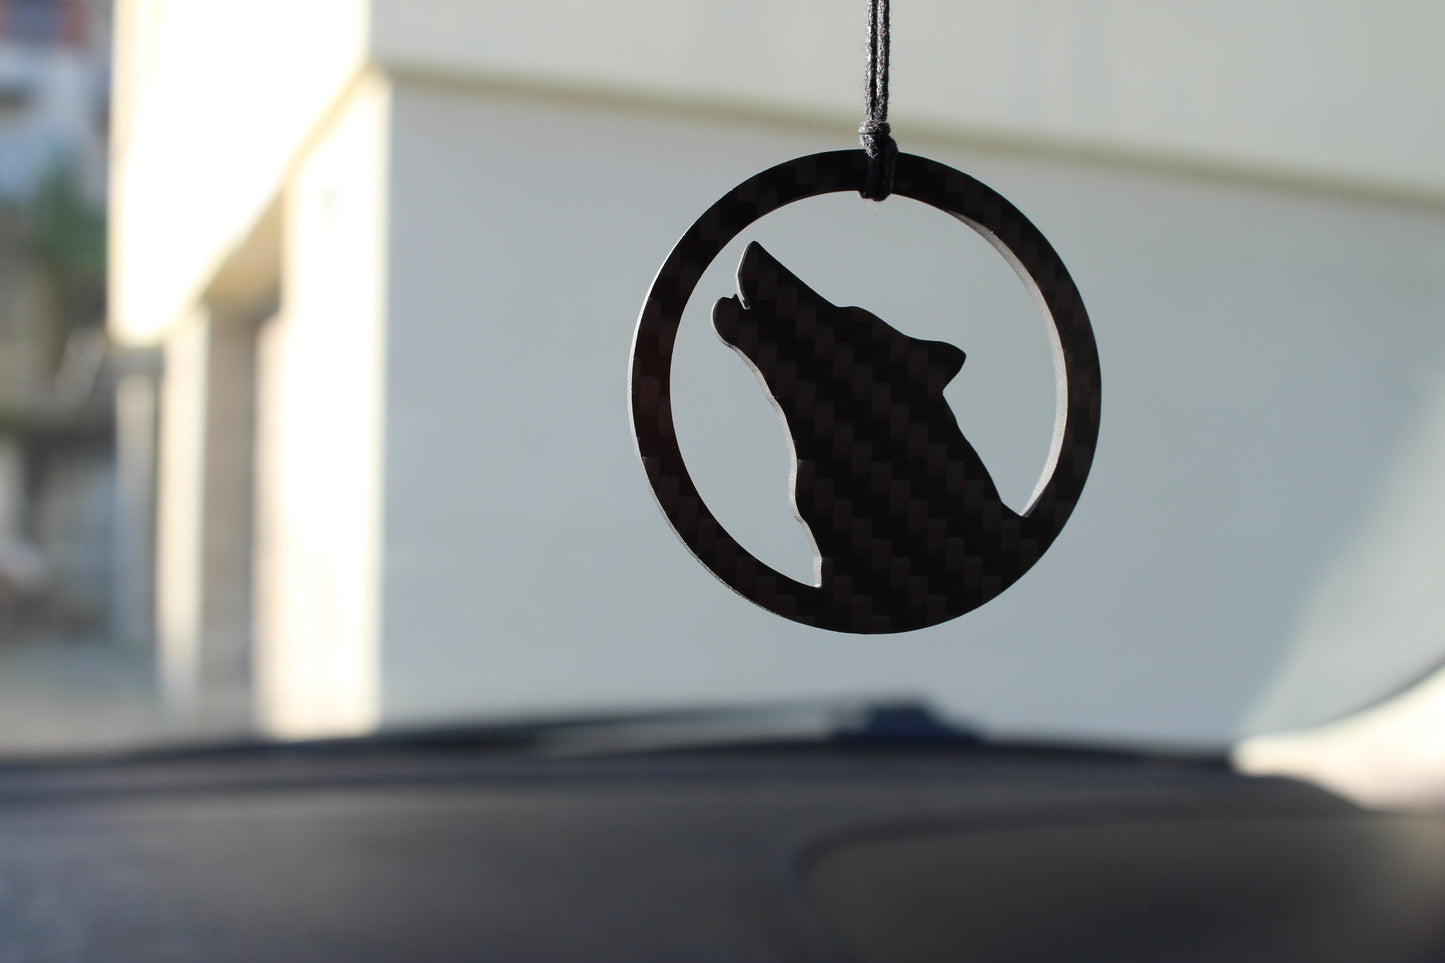 Moon pendant with wolf